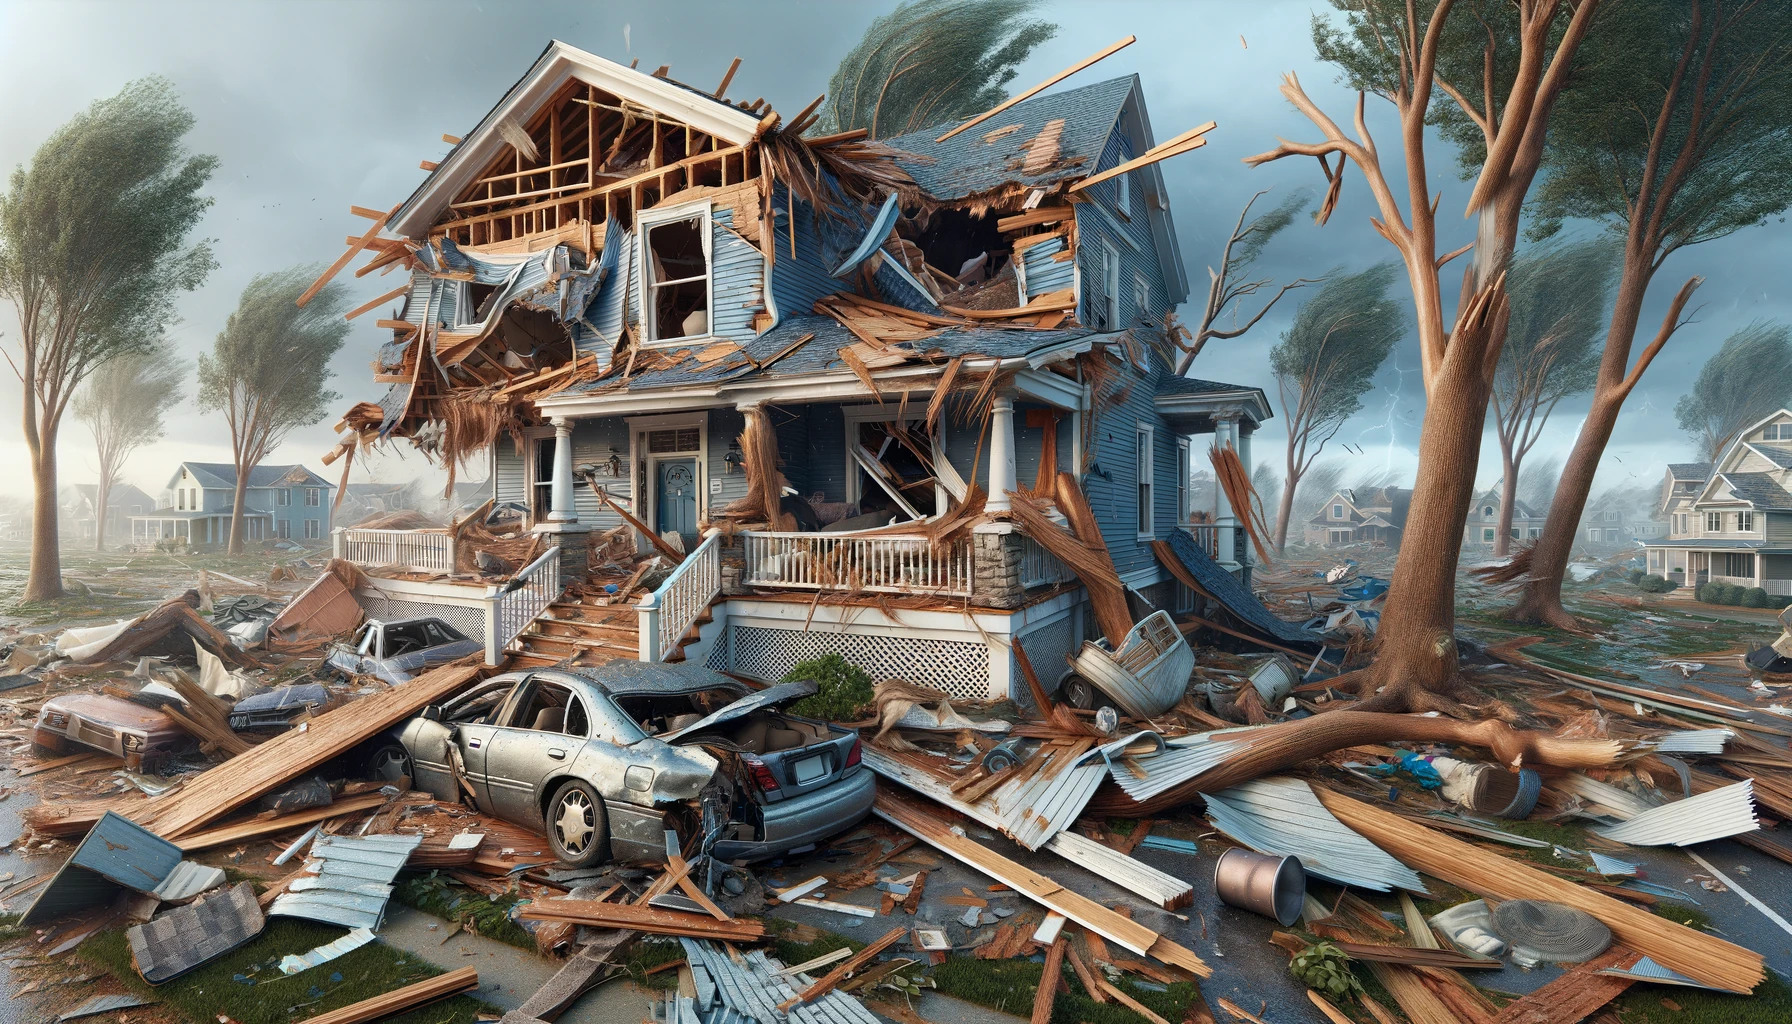 The impact of replacement cost on home insurance